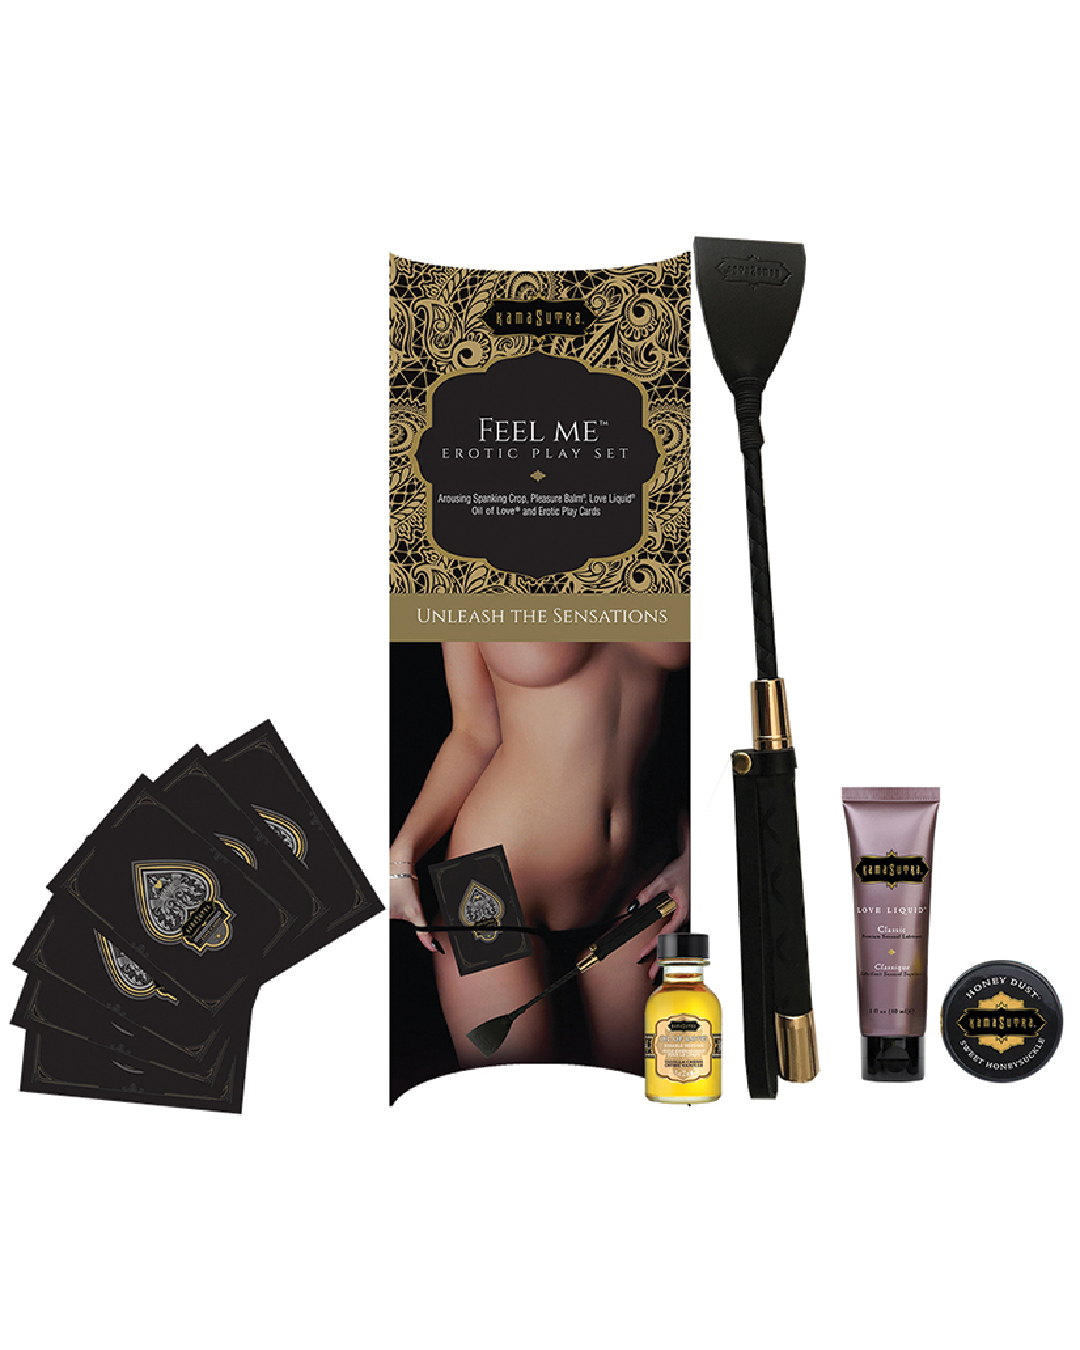 Kama Sutra Feel Me Erotic Play Set contents and box 